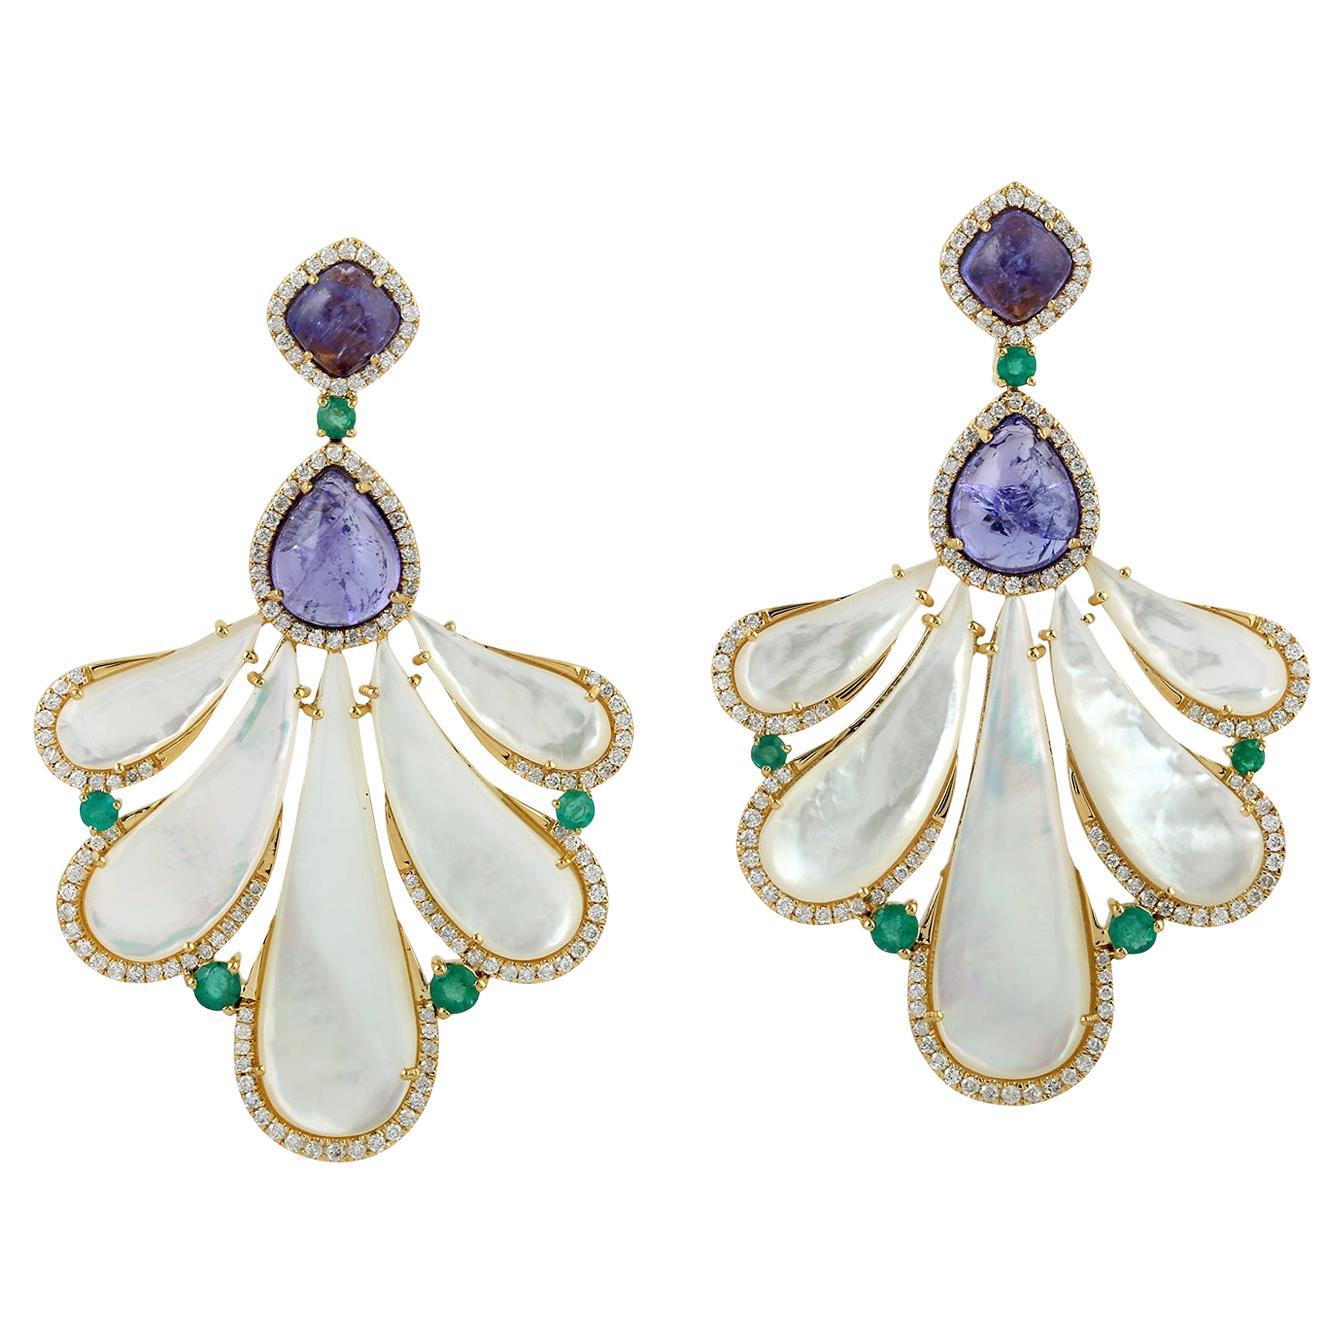 32.17ct Pearl Dangle Earrings With Tanzanite & Emerald Accented With Diamonds For Sale